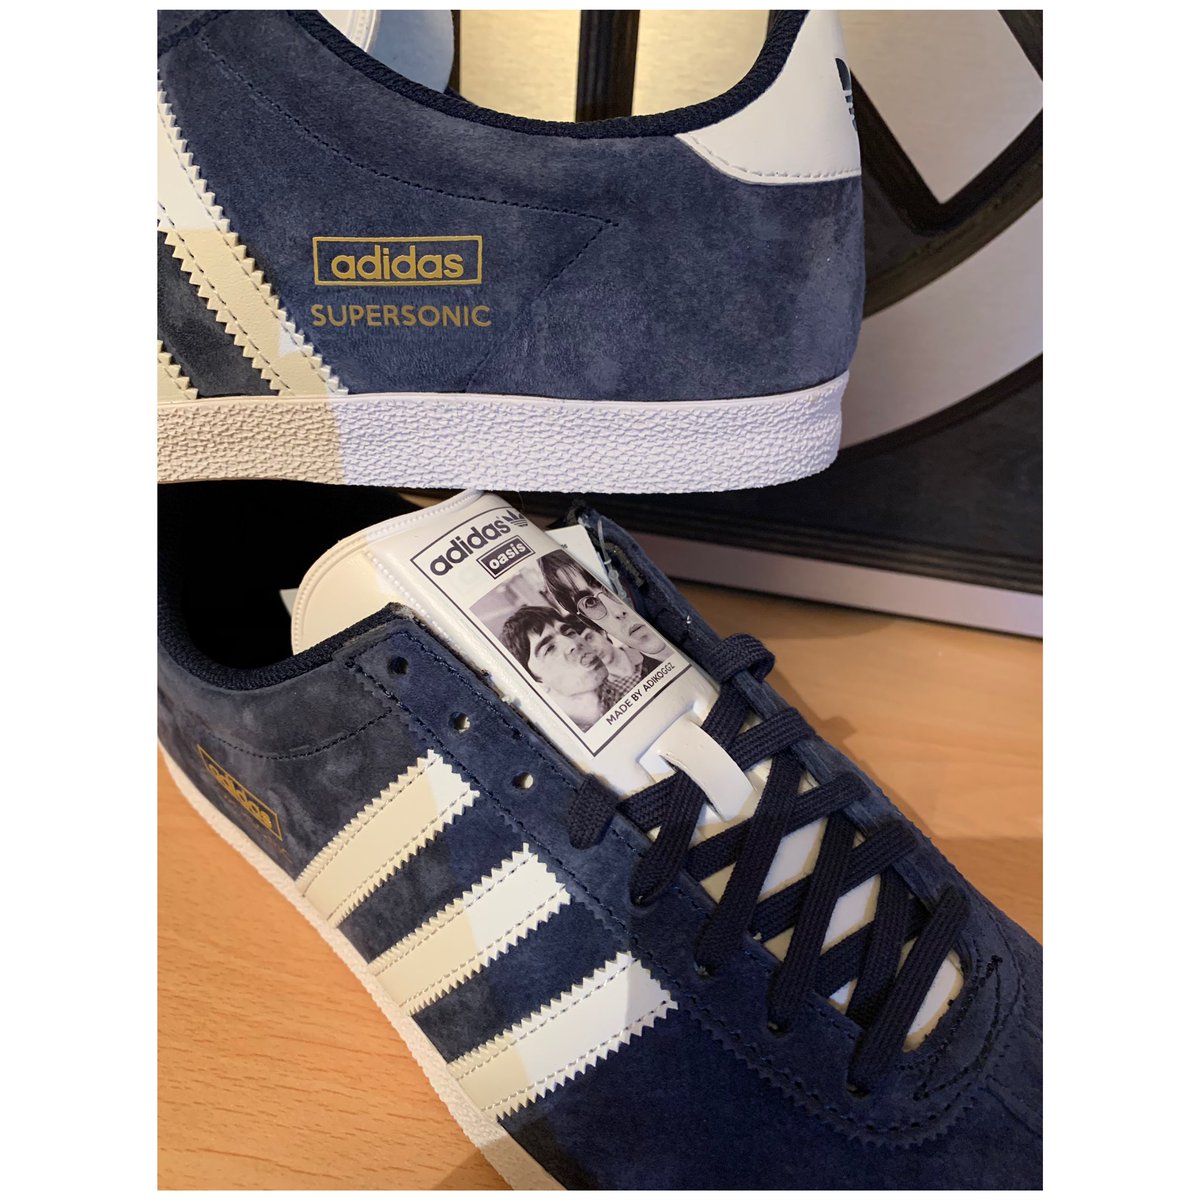 Buy > oasis trainers adidas > in stock